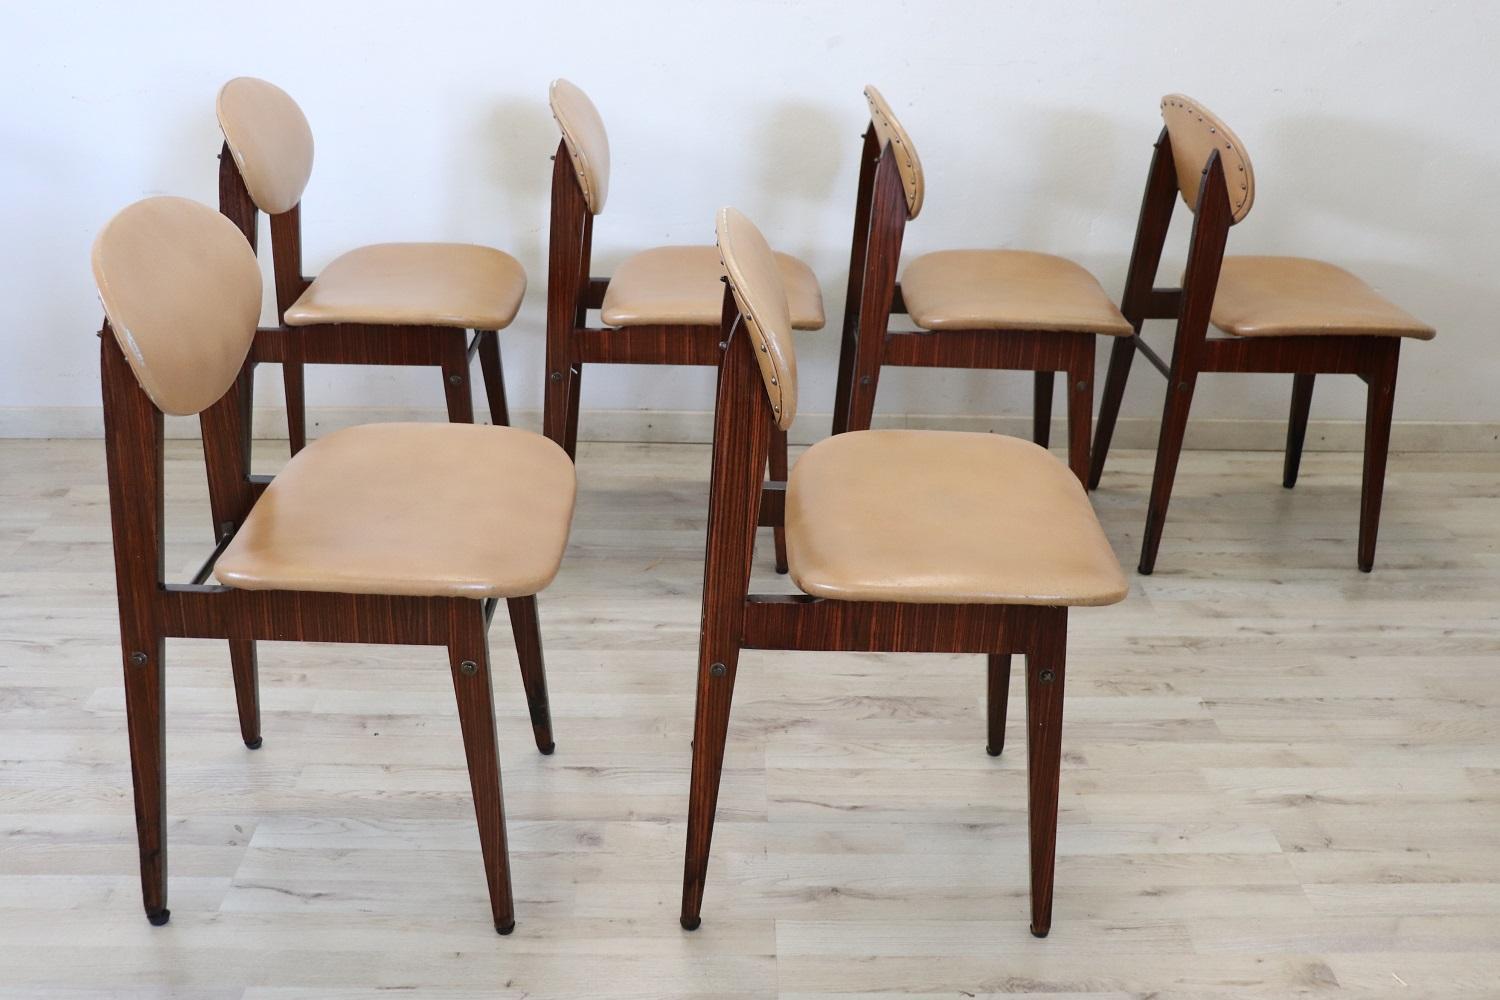 Italian Design Set of Six Chairs in Beech Wood and Faux Leather, 1960s For Sale 1